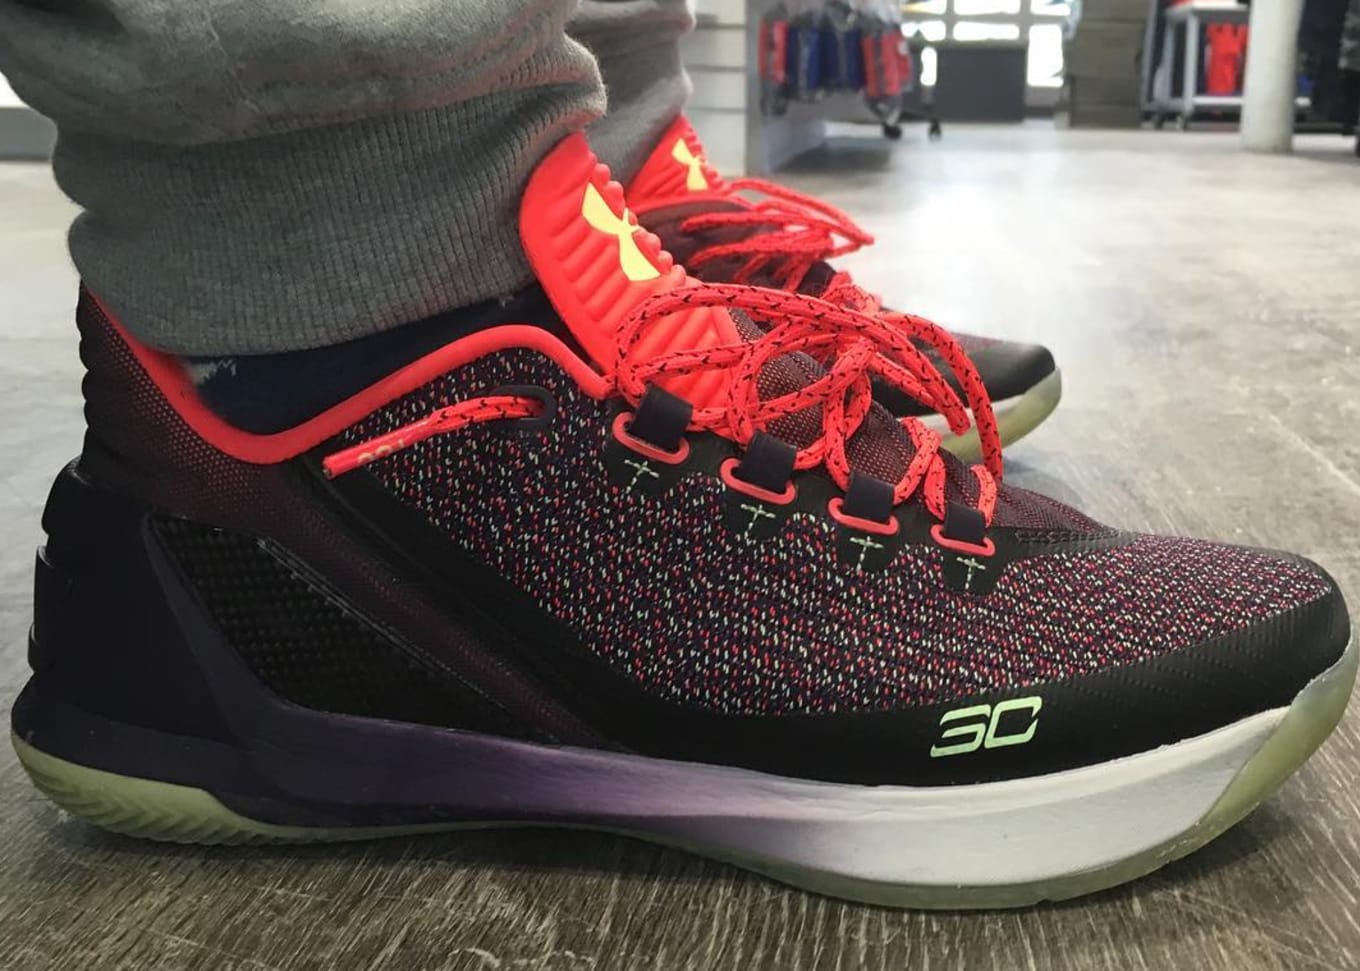 Under Armour Curry 3 Low Black Red 